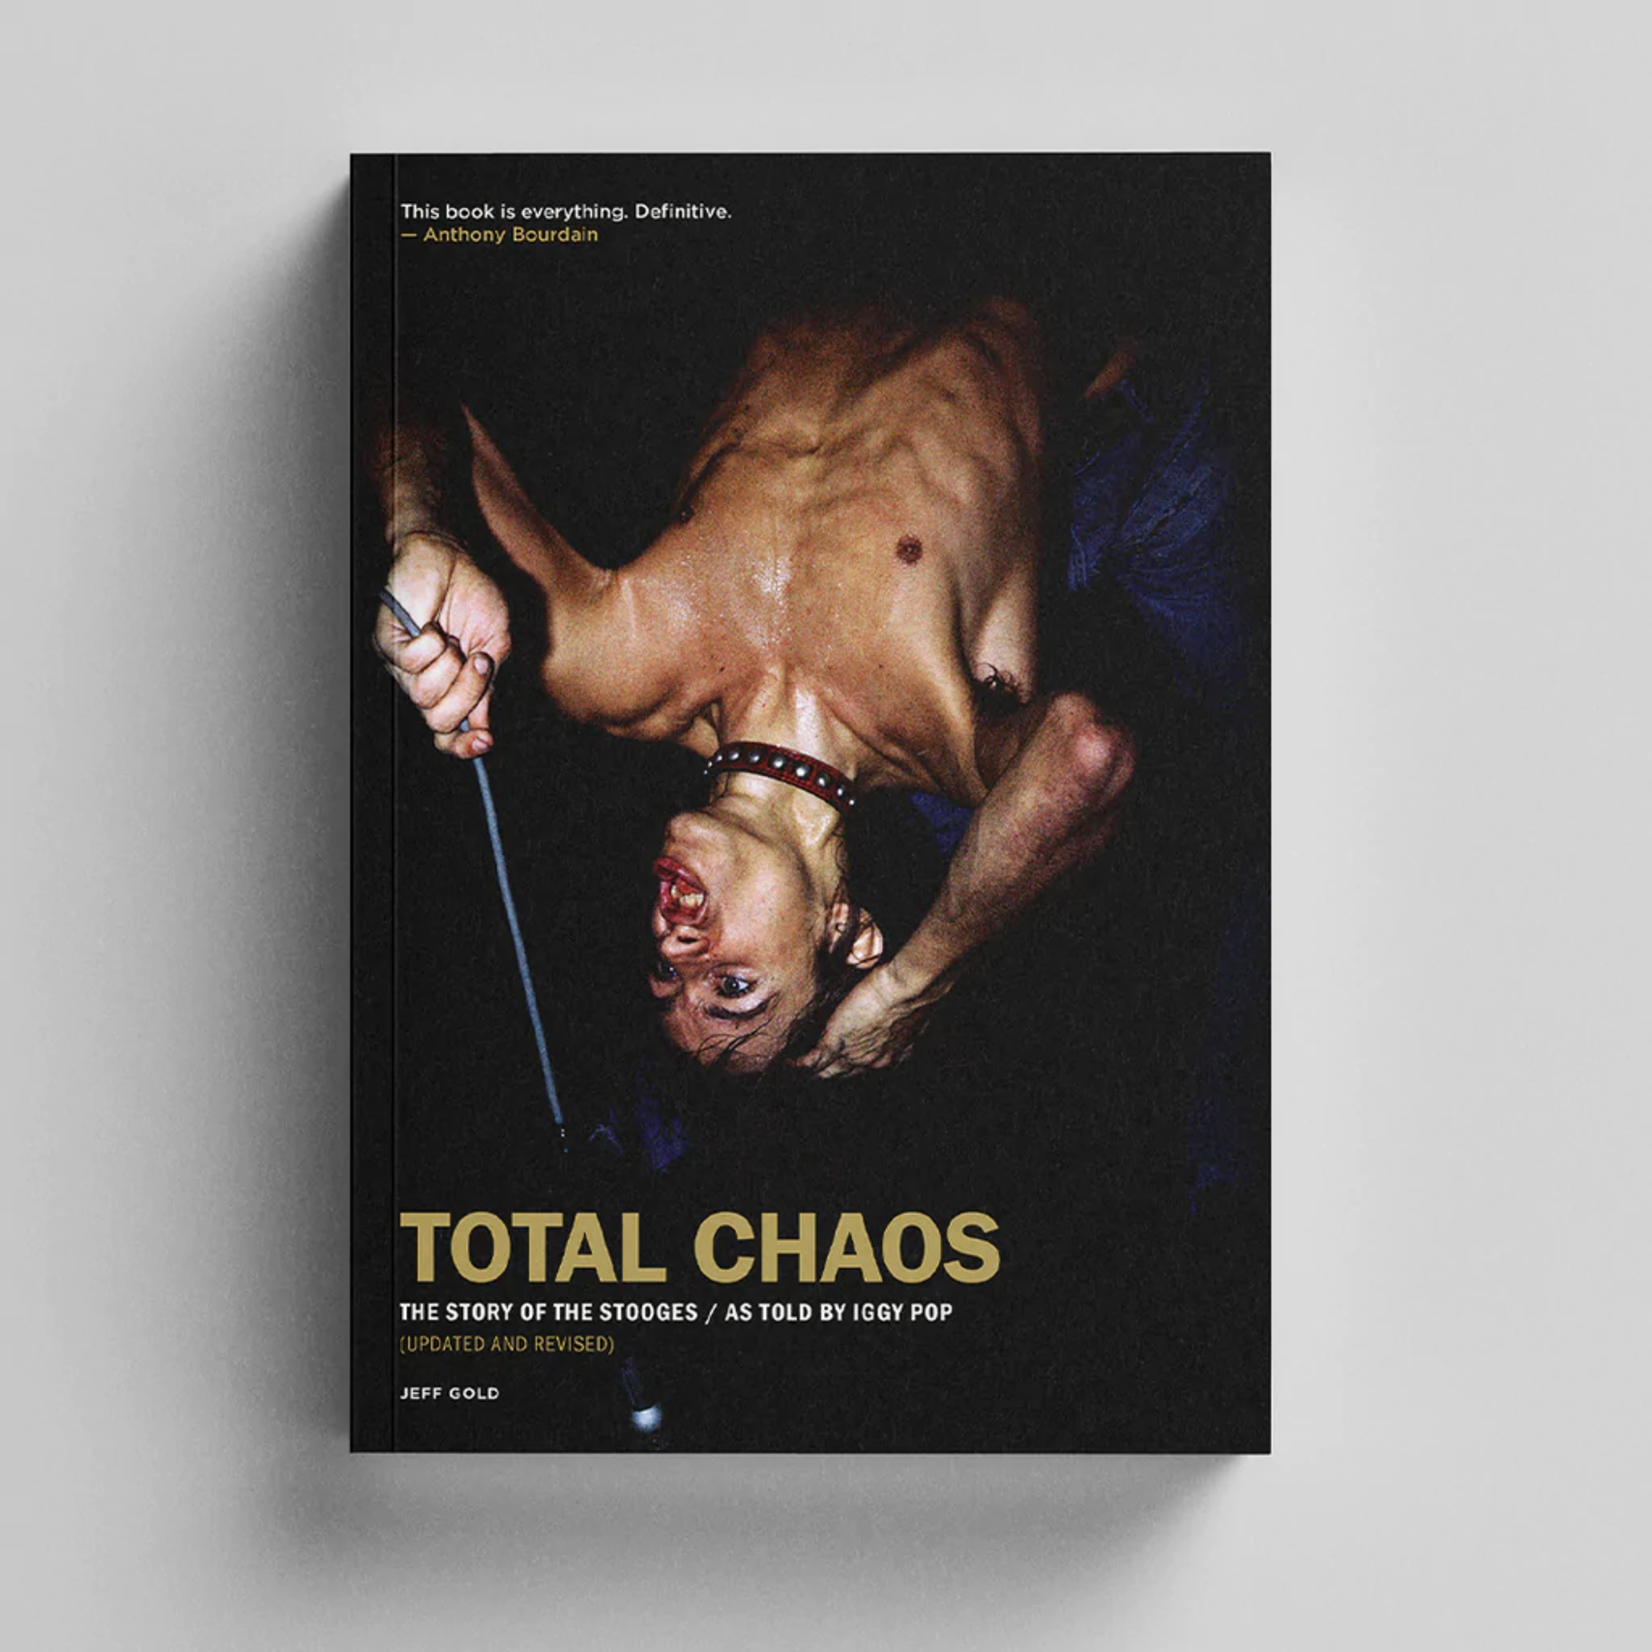 Third Man Jeff Gold - Total Chaos: The Story of the Stooges As Told by Iggy Pop, Revised (Book)